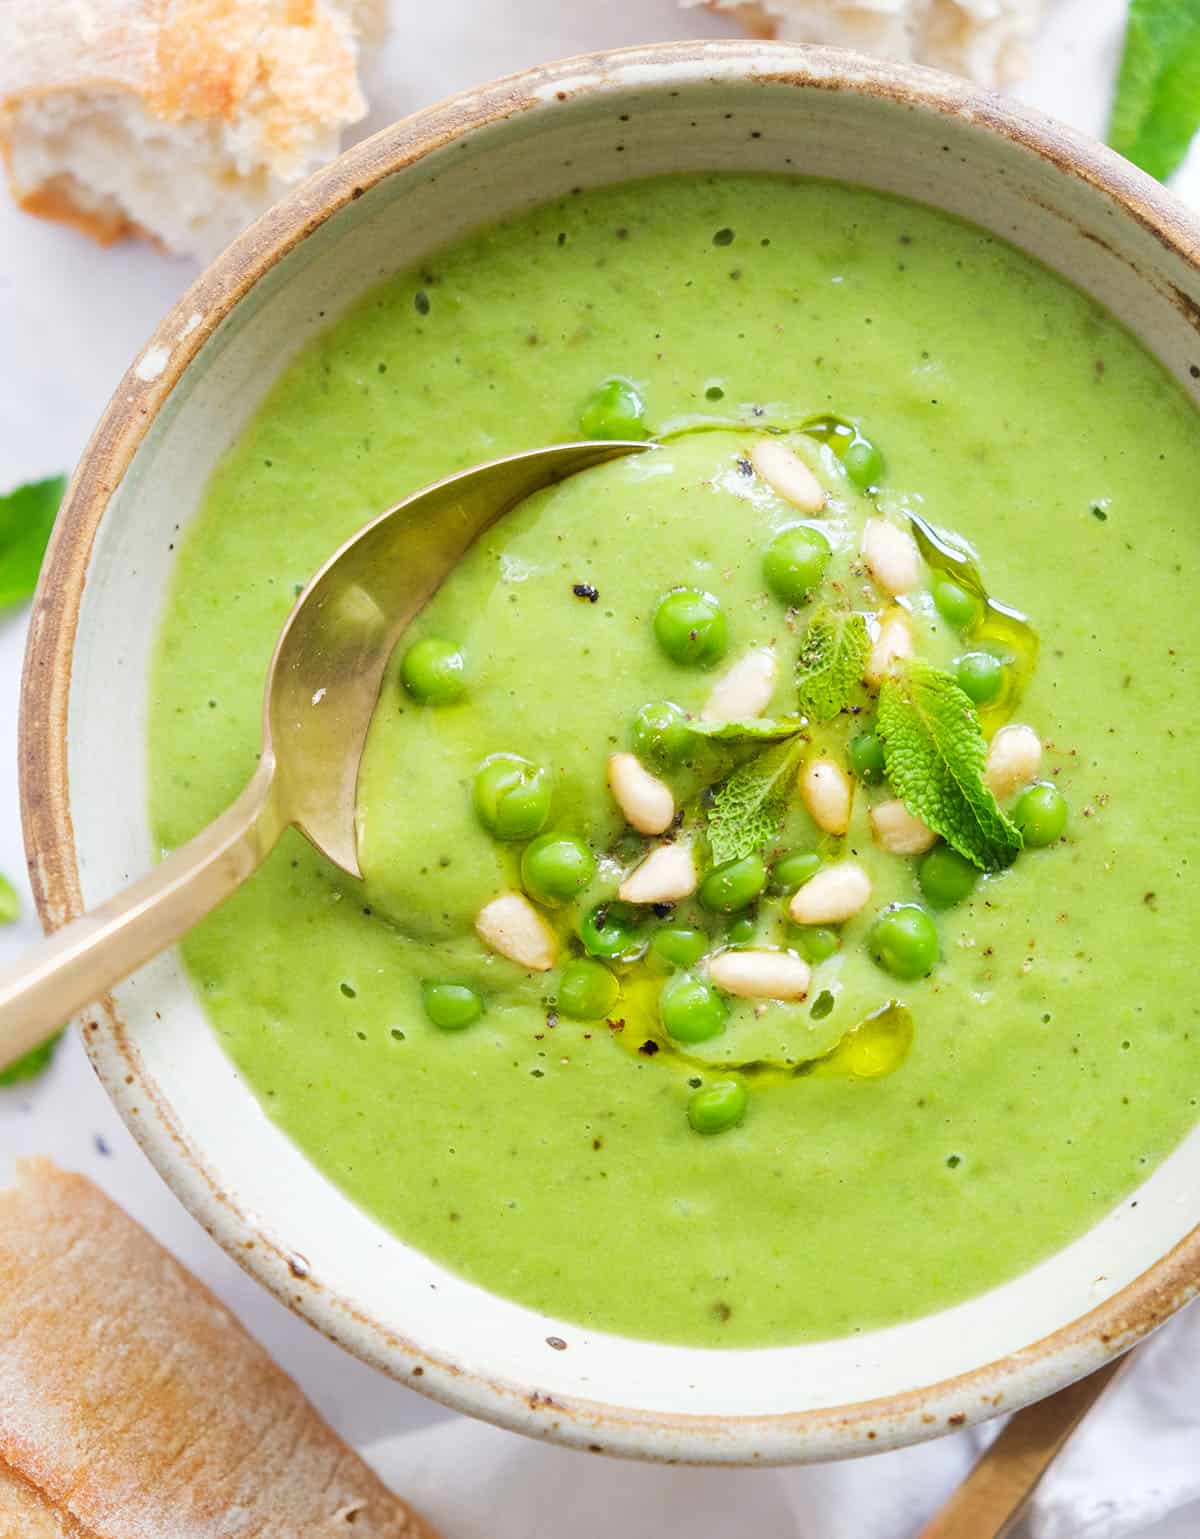 Top view of a bowl full of creamy green pea soup garnished with peas and pine nuts.